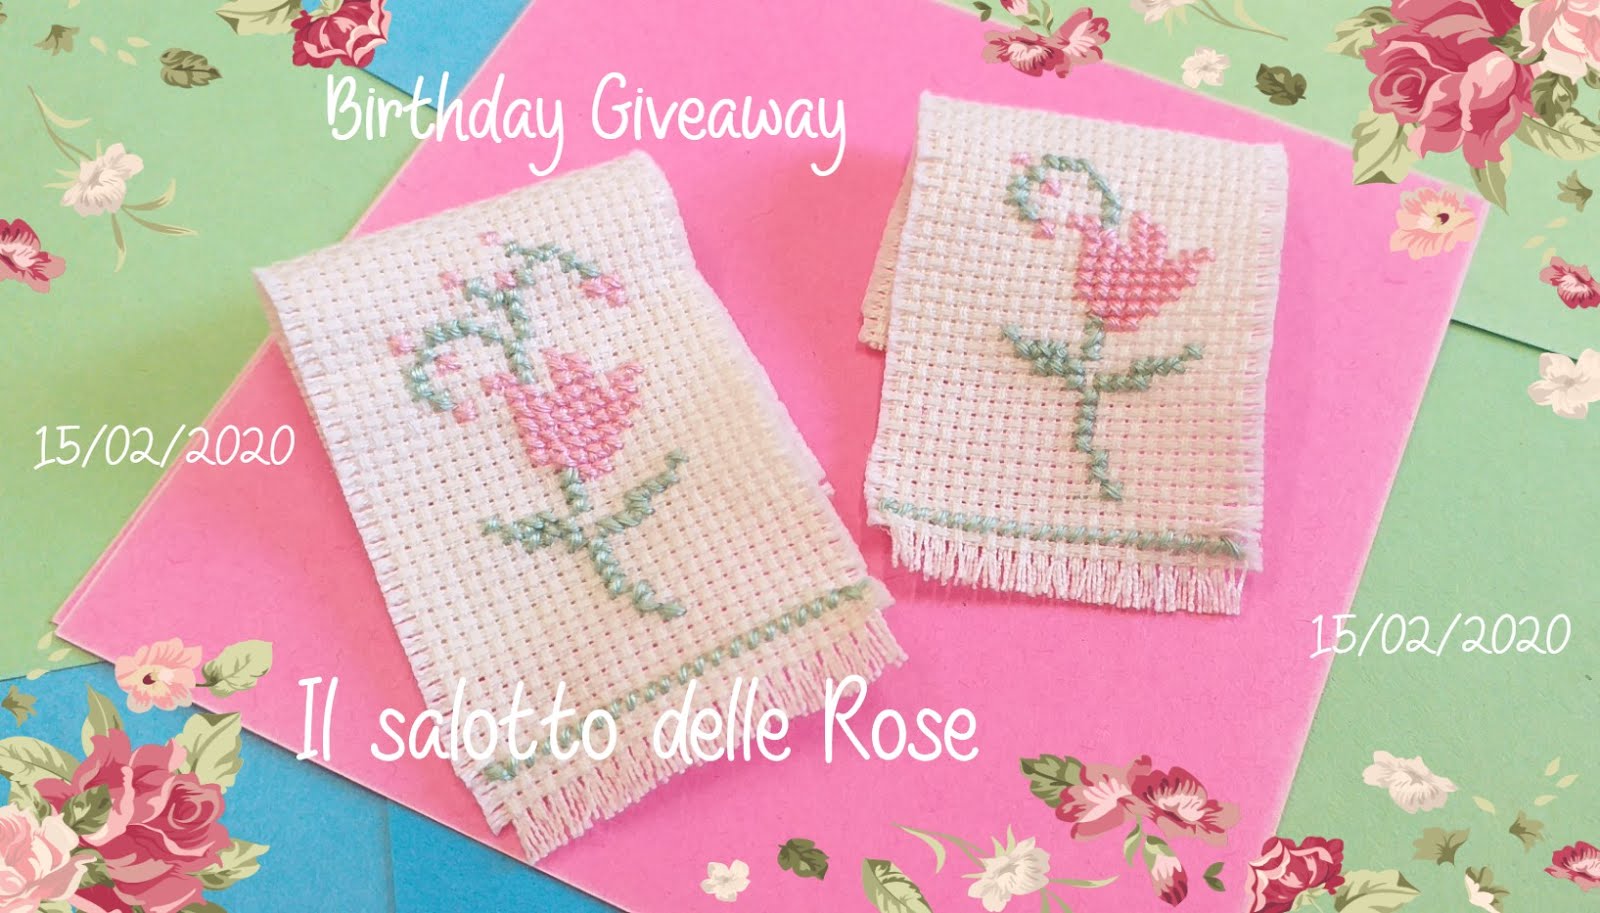 Rosella's Giveaway